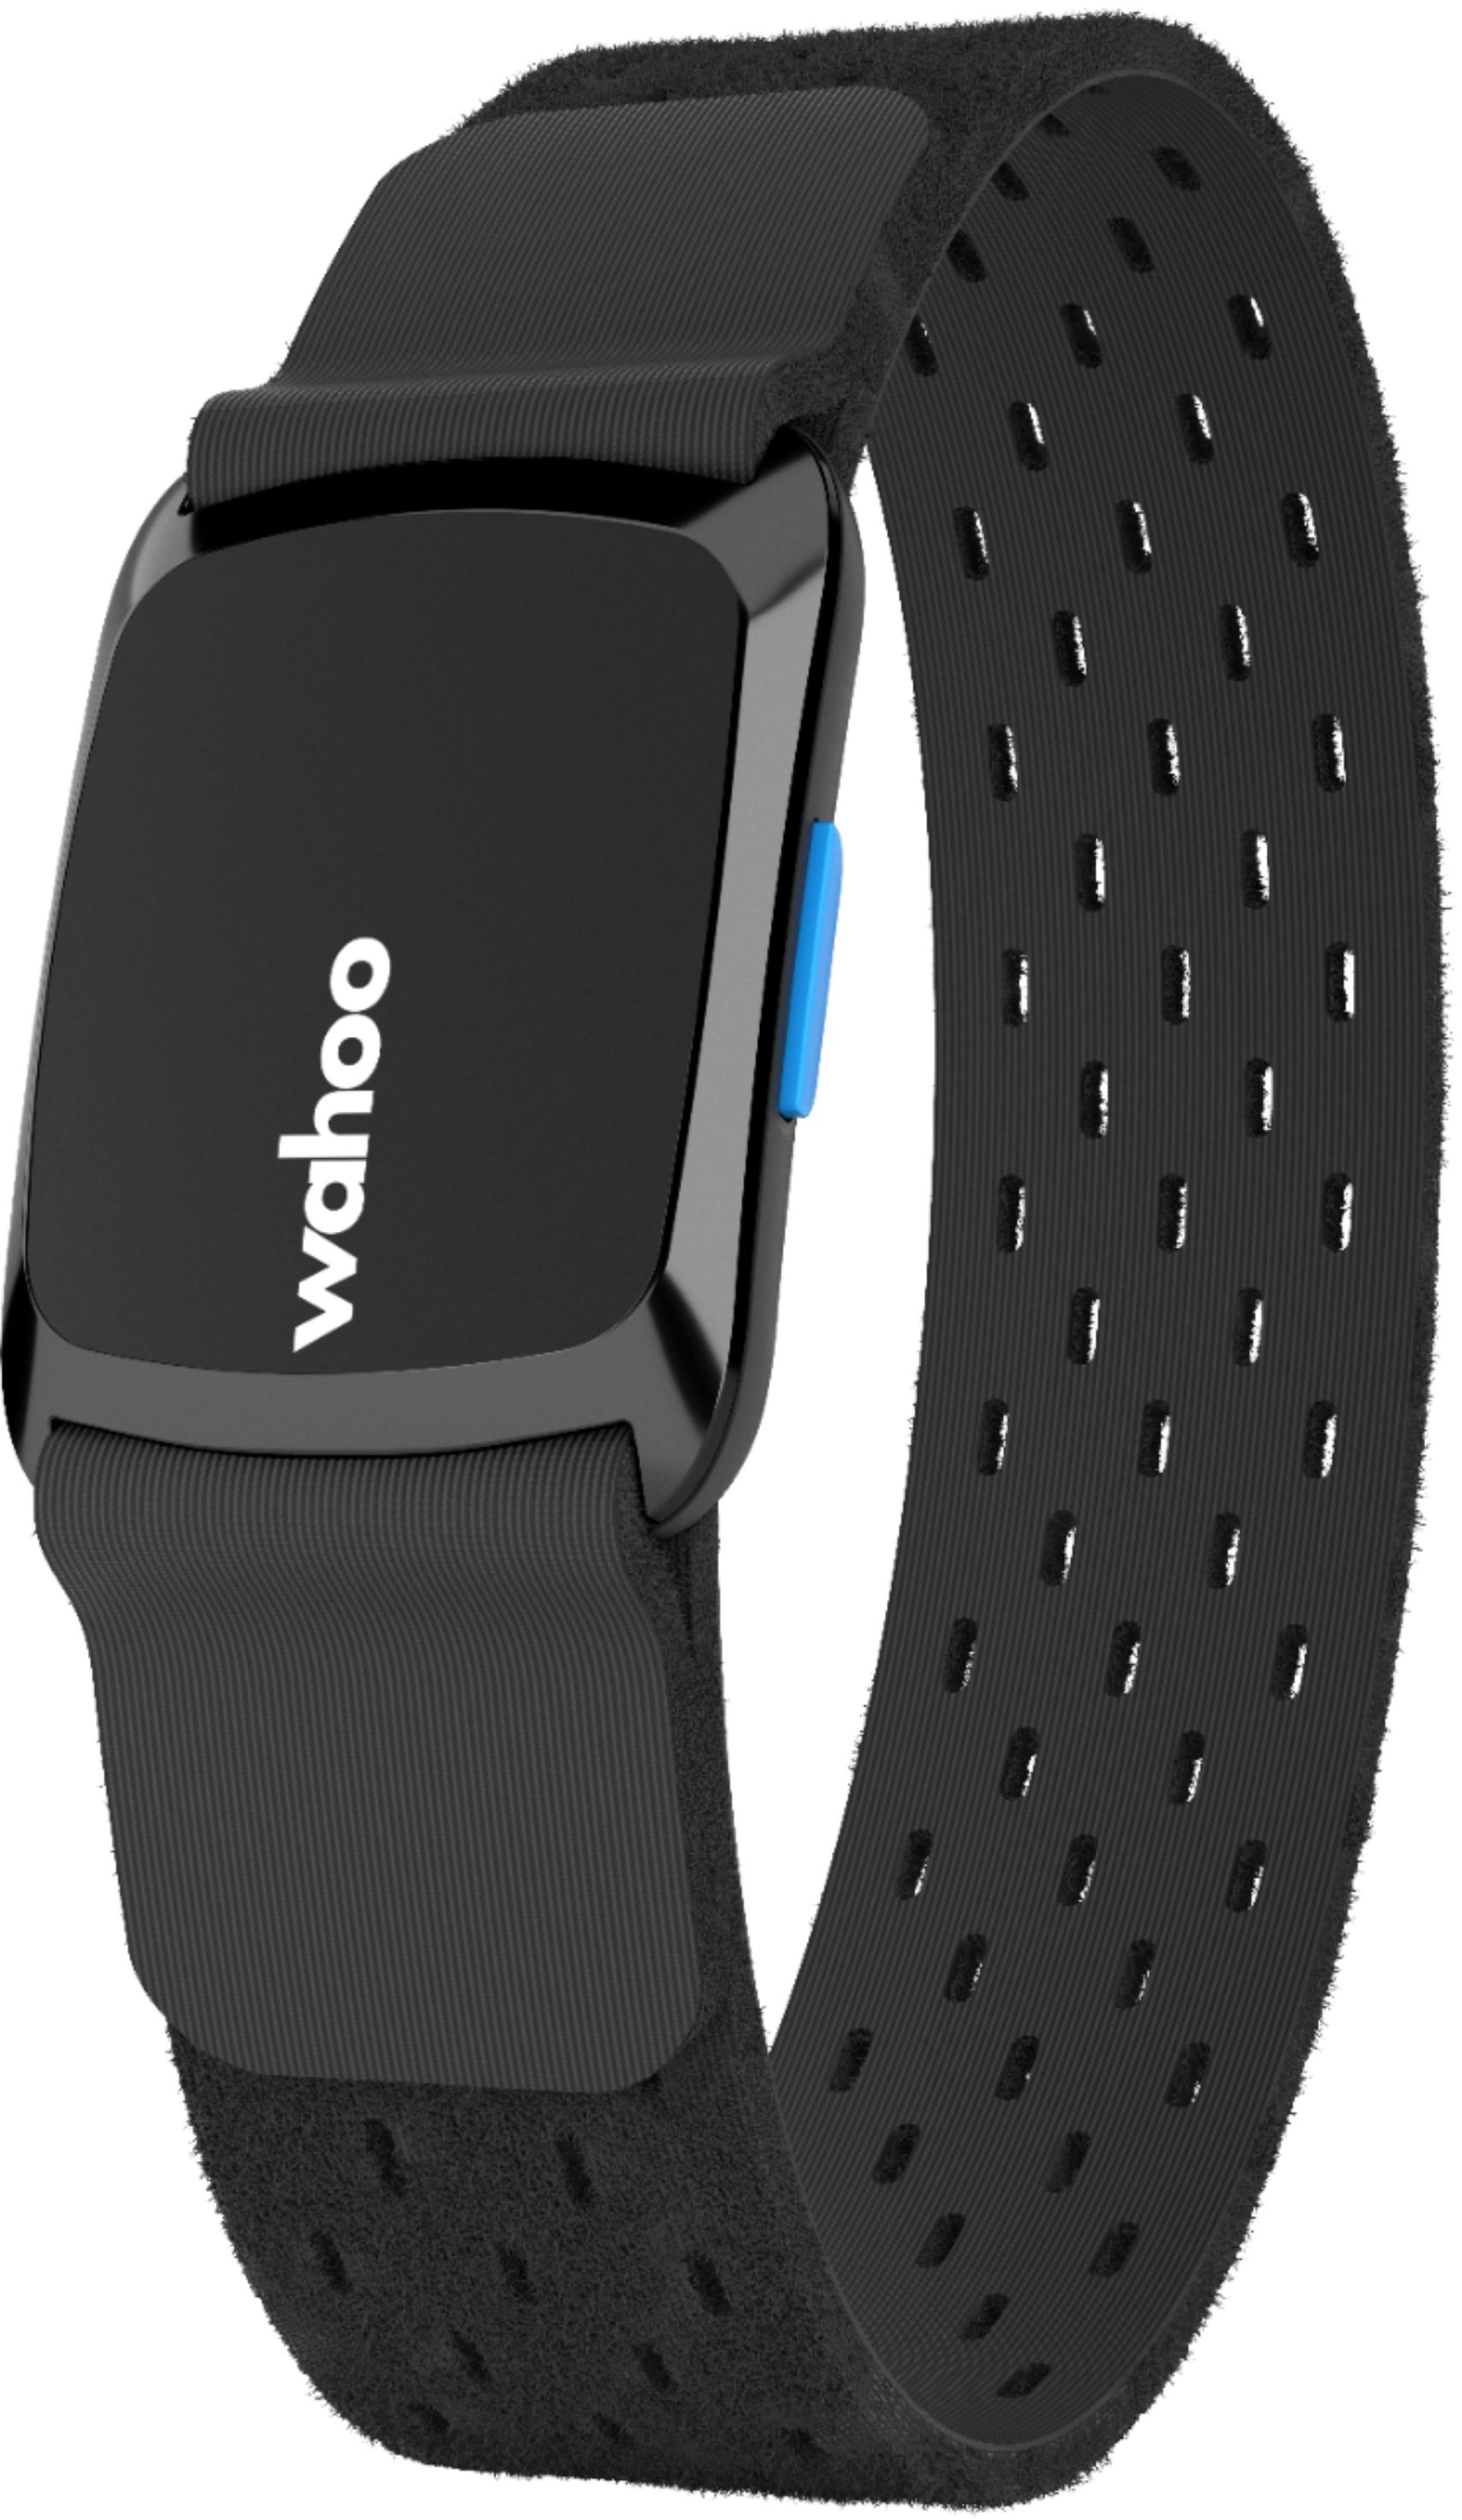 Left View: Wahoo Fitness - TICKR FIT Activity Tracker + Heart Rate - Black